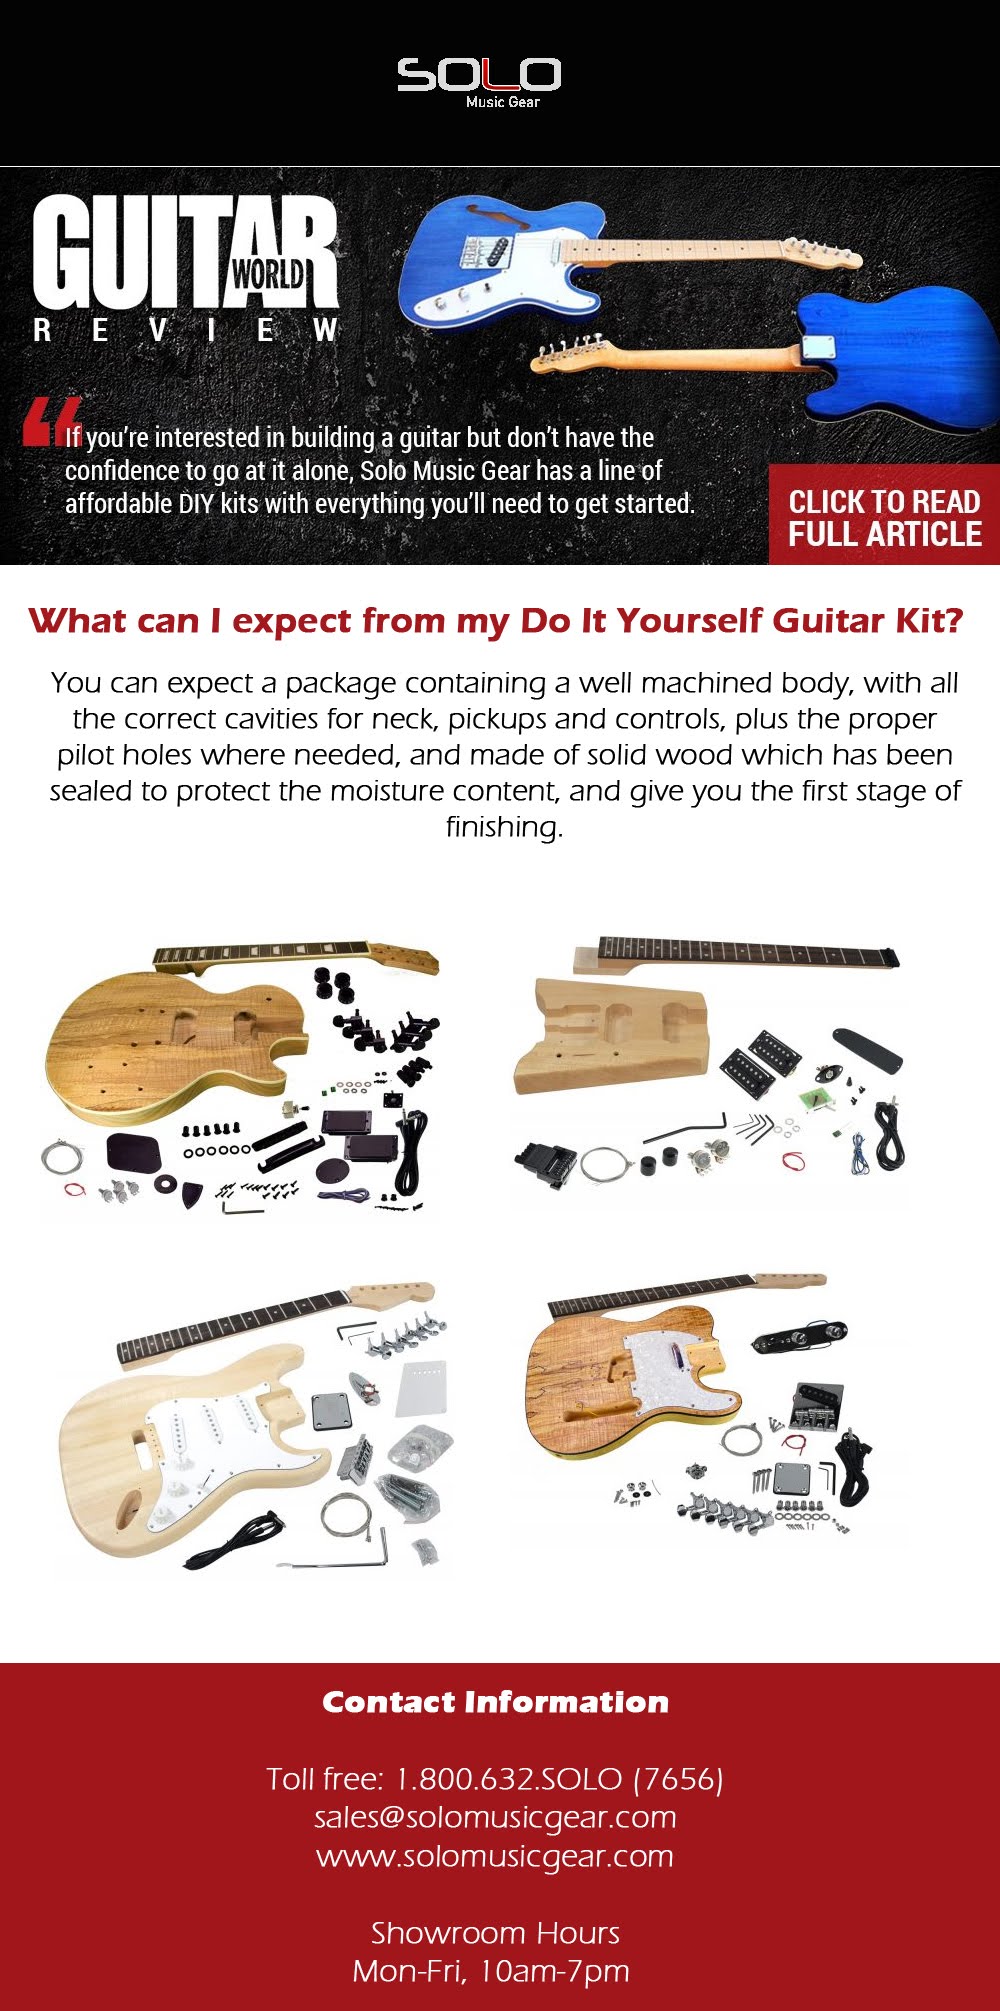 What Can I Expect From My Do It Yourself Guitar kit.jpg  by Solomusicgear